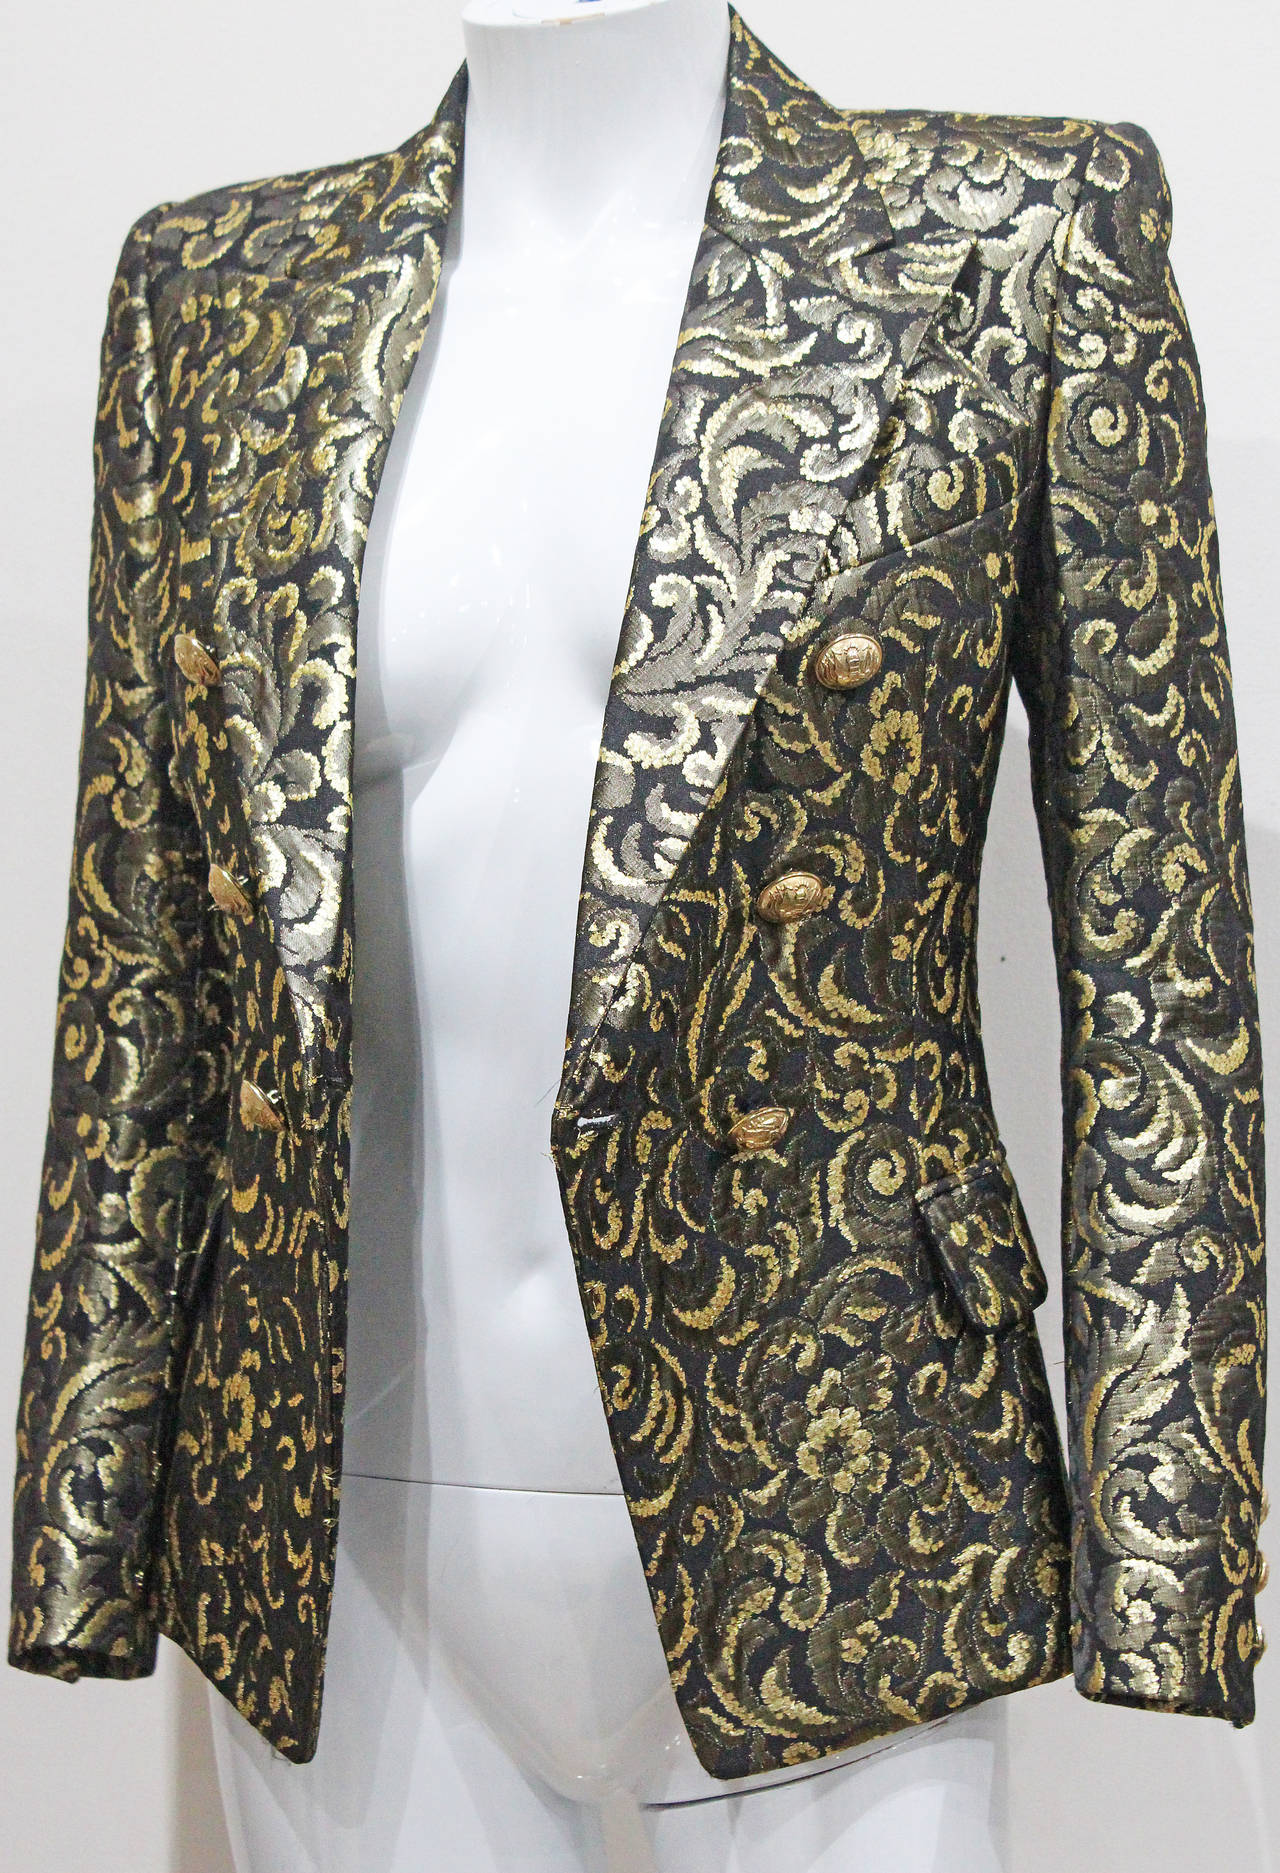 A rare and highly sought after Balmain evening blazer from the Fall 2010 runway collection, designed by Christophe Decarnin. The blazer is in a high quality jacquard fabric with gold-tone metal thread. 

The jacket is like new/unworn and comes